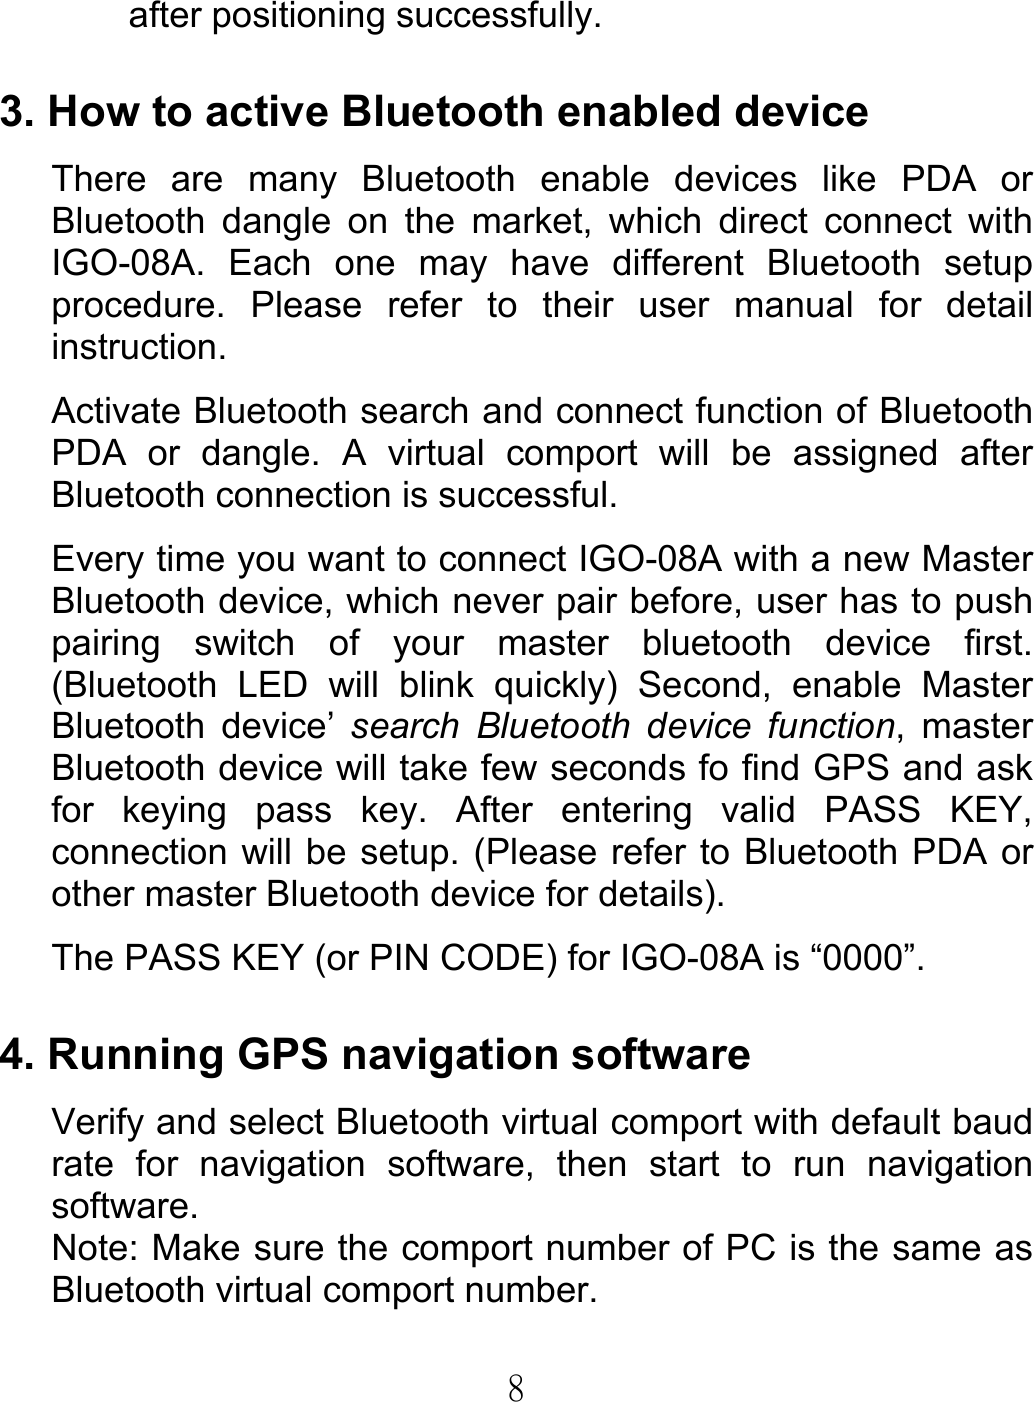  8after positioning successfully.  3. How to active Bluetooth enabled device There are many Bluetooth enable devices like PDA or Bluetooth dangle on the market, which direct connect with IGO-08A. Each one may have different Bluetooth setup procedure. Please refer to their user manual for detail instruction. Activate Bluetooth search and connect function of Bluetooth PDA or dangle. A virtual comport will be assigned after Bluetooth connection is successful.   Every time you want to connect IGO-08A with a new Master Bluetooth device, which never pair before, user has to push pairing switch of your master bluetooth device first. (Bluetooth LED will blink quickly) Second, enable Master Bluetooth device’ search Bluetooth device function, master Bluetooth device will take few seconds fo find GPS and ask for keying pass key. After entering valid PASS KEY, connection will be setup. (Please refer to Bluetooth PDA or other master Bluetooth device for details). The PASS KEY (or PIN CODE) for IGO-08A is “0000”.  4. Running GPS navigation software Verify and select Bluetooth virtual comport with default baud rate for navigation software, then start to run navigation software. Note: Make sure the comport number of PC is the same as Bluetooth virtual comport number.      